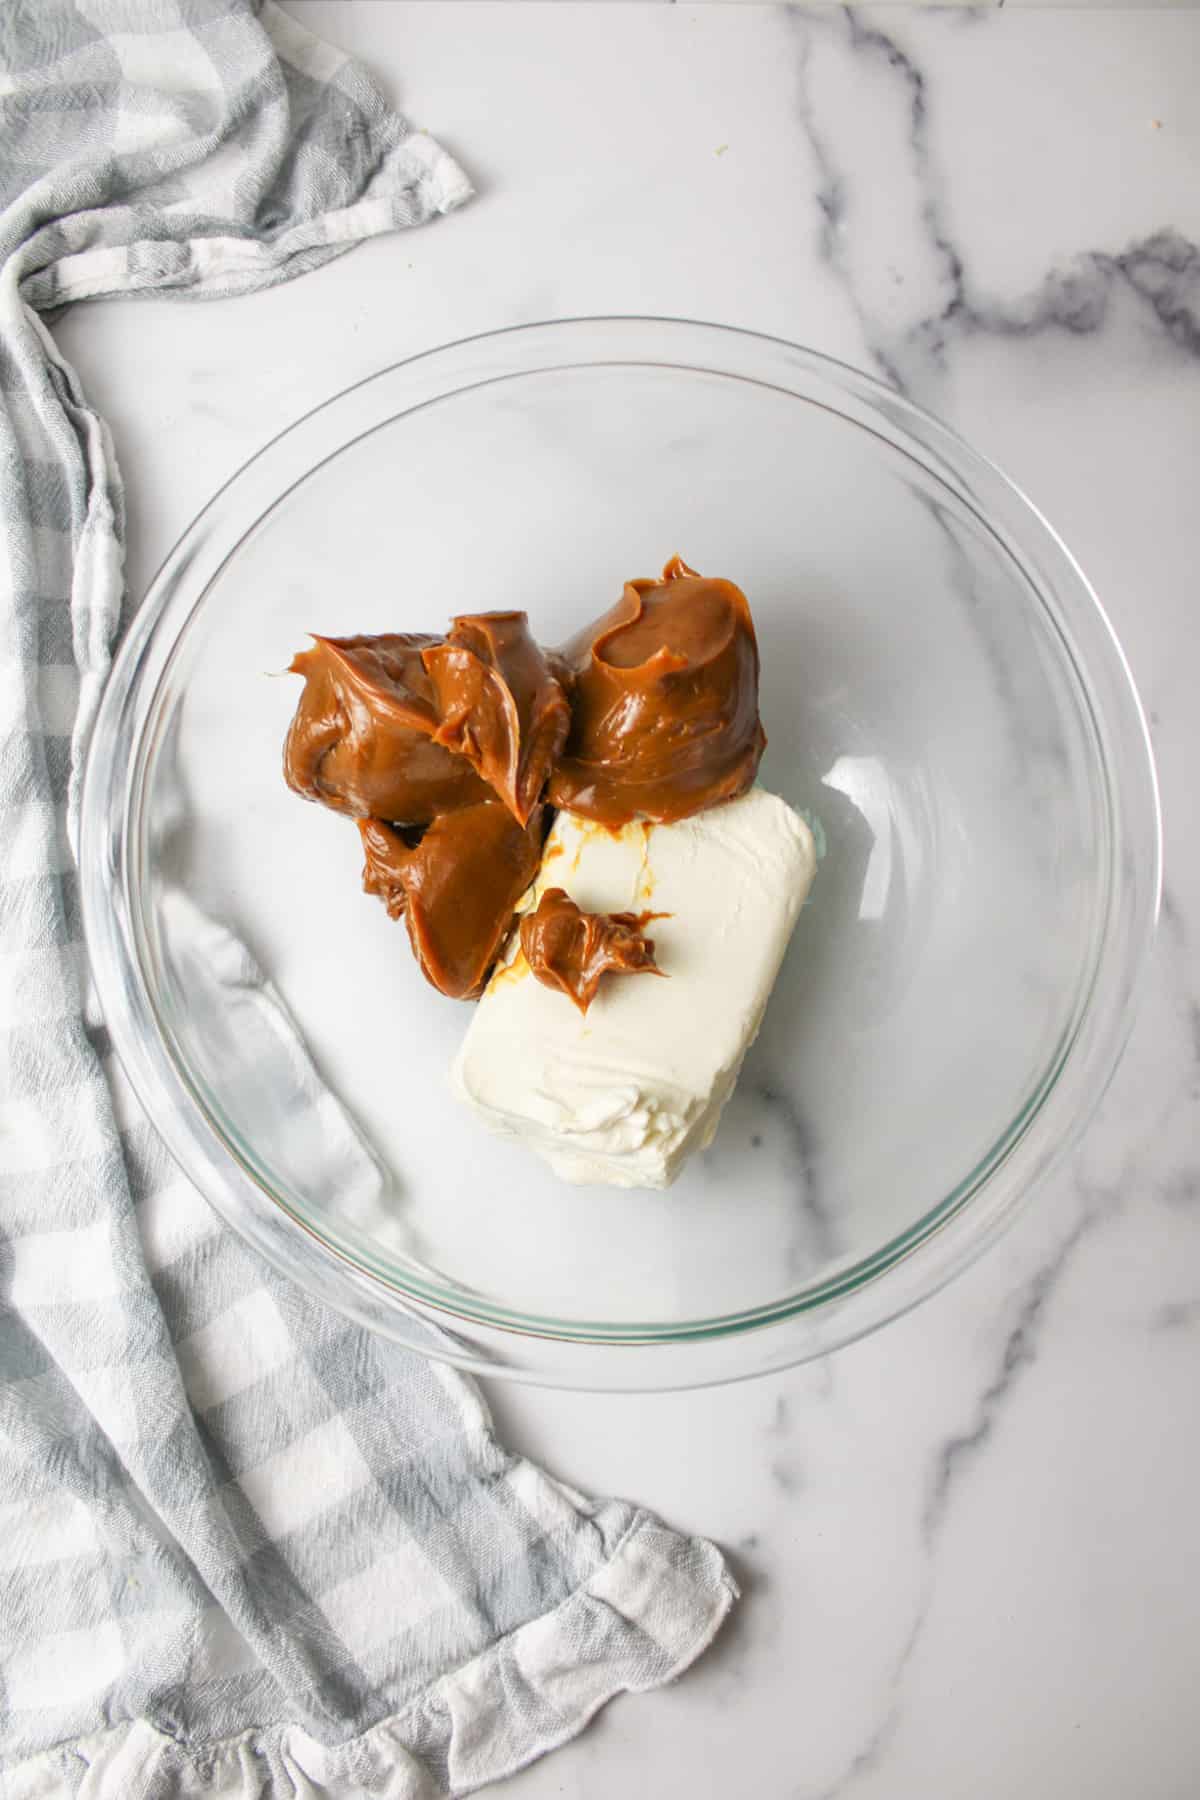 dulce de leche and cream cheese in a mixing bowl